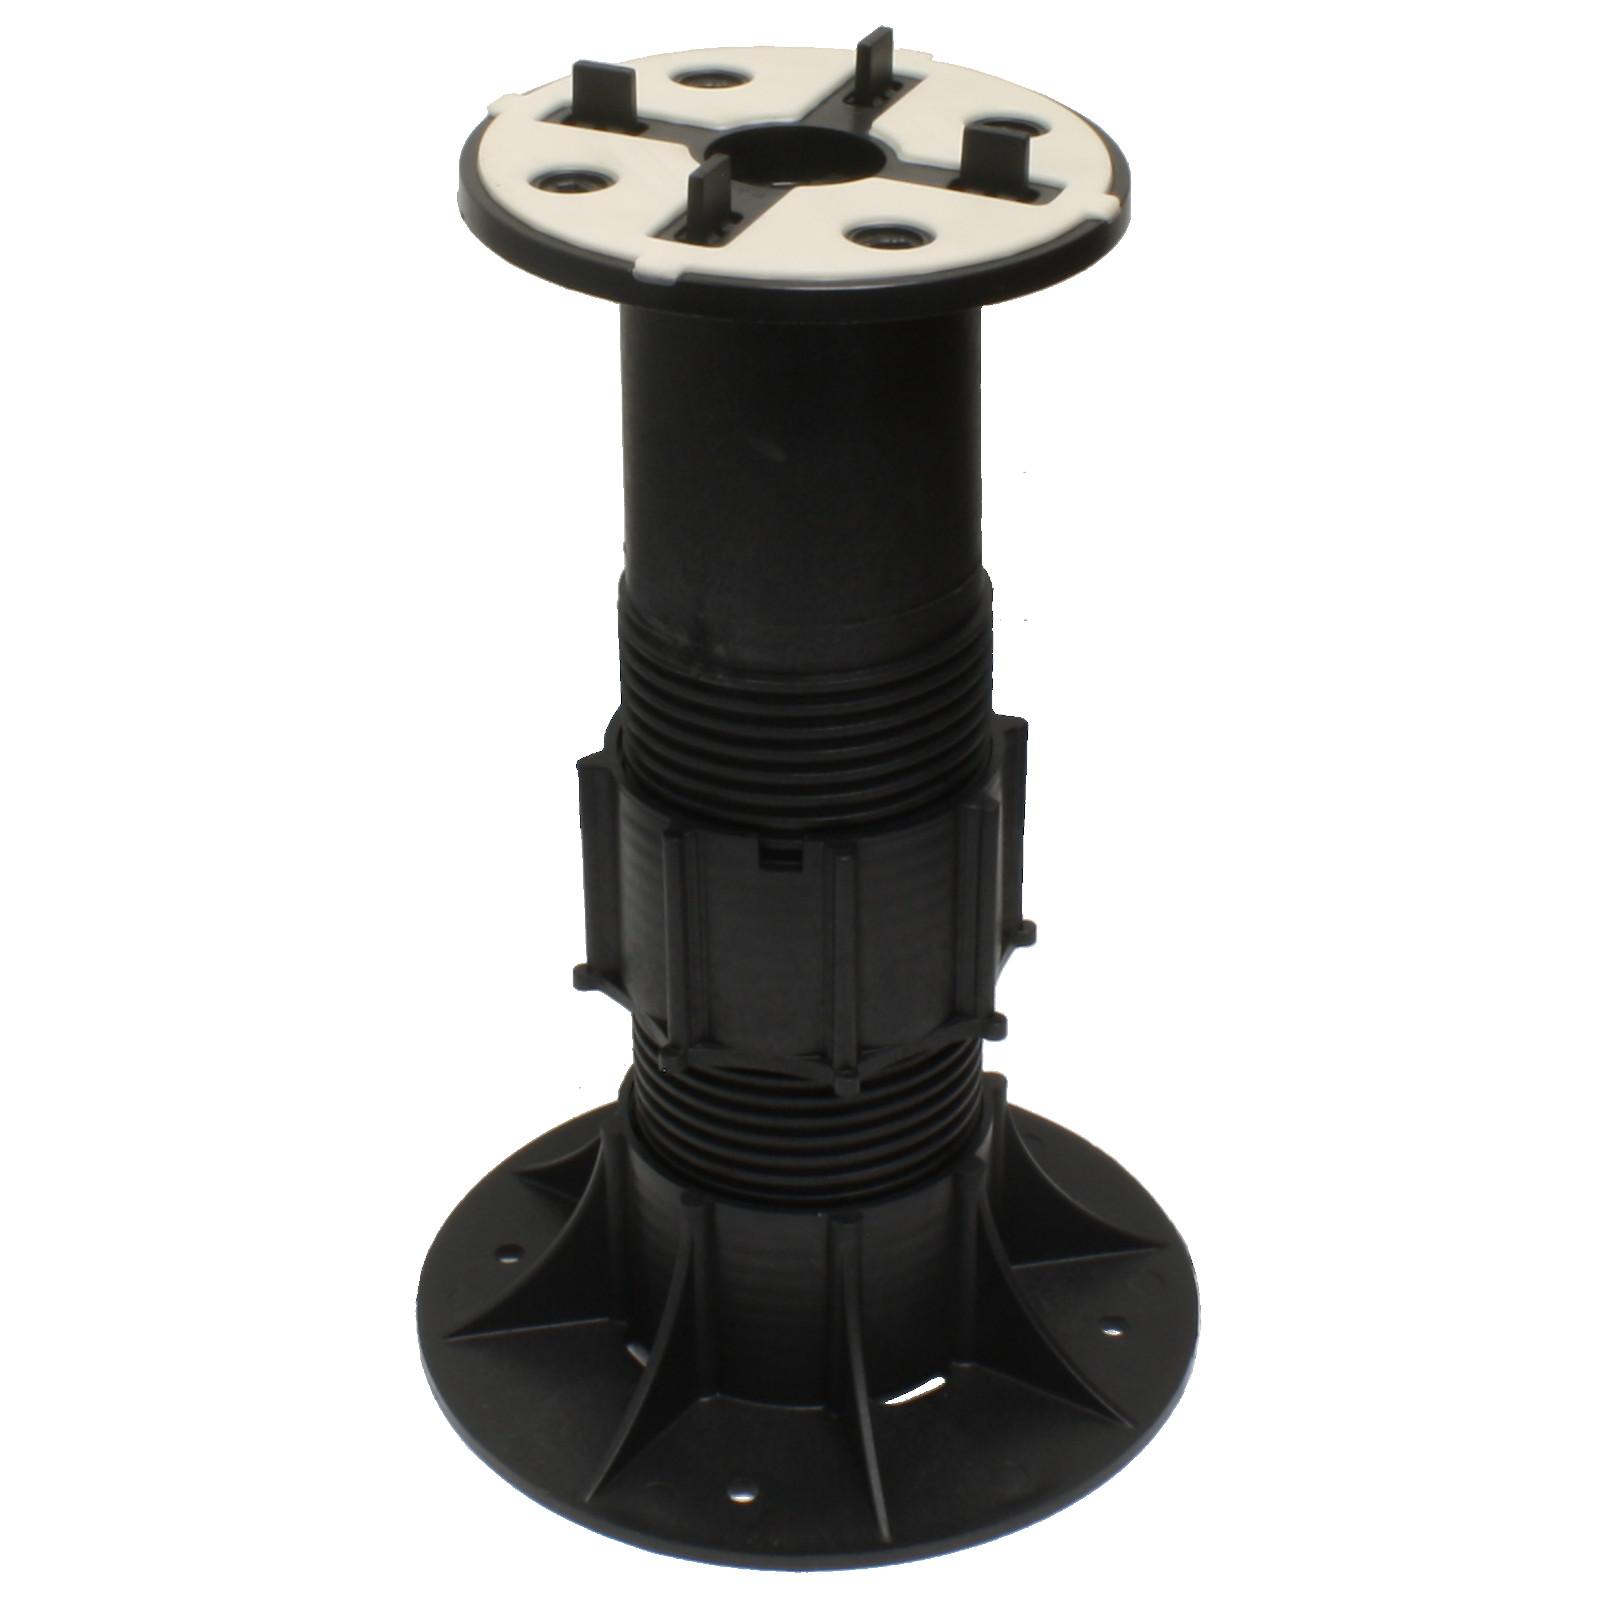 SE8 Adj Ped Support w/ Three-in-One Self Leveling Head 9.25” ‐ 12.75” (235‐325Mm)